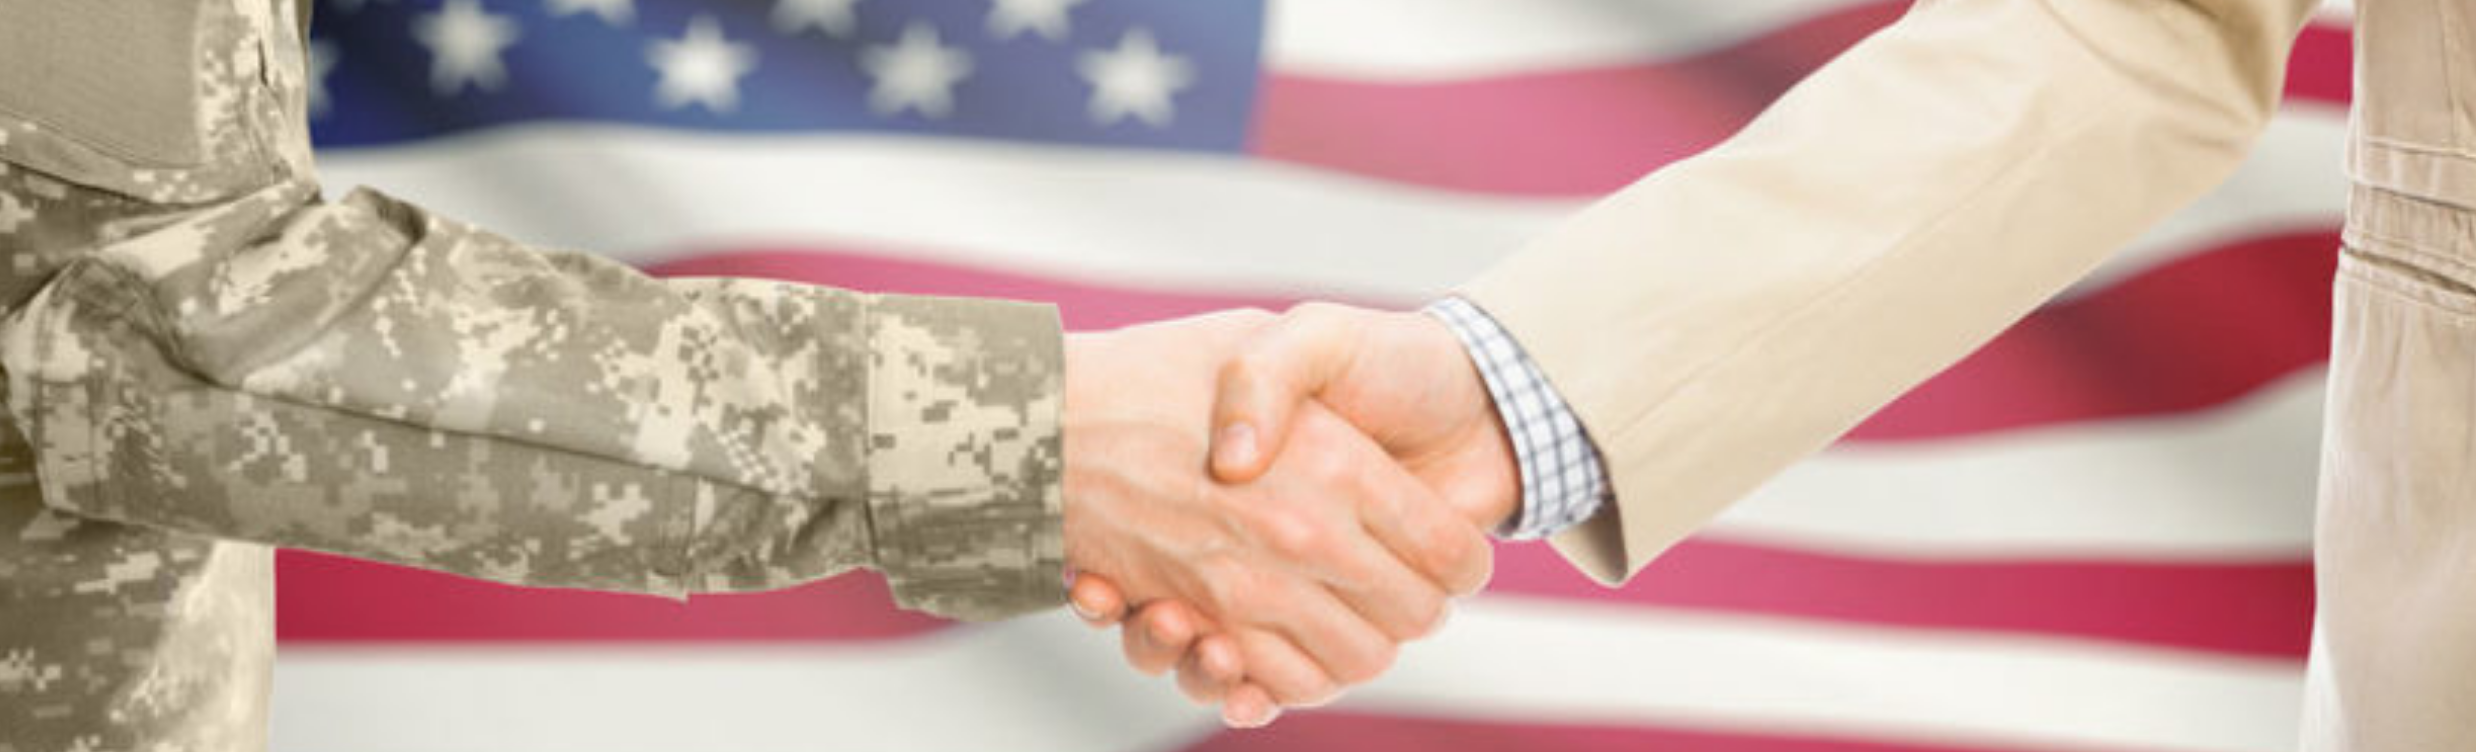 programs that provide assistance and appreciation to veterans.